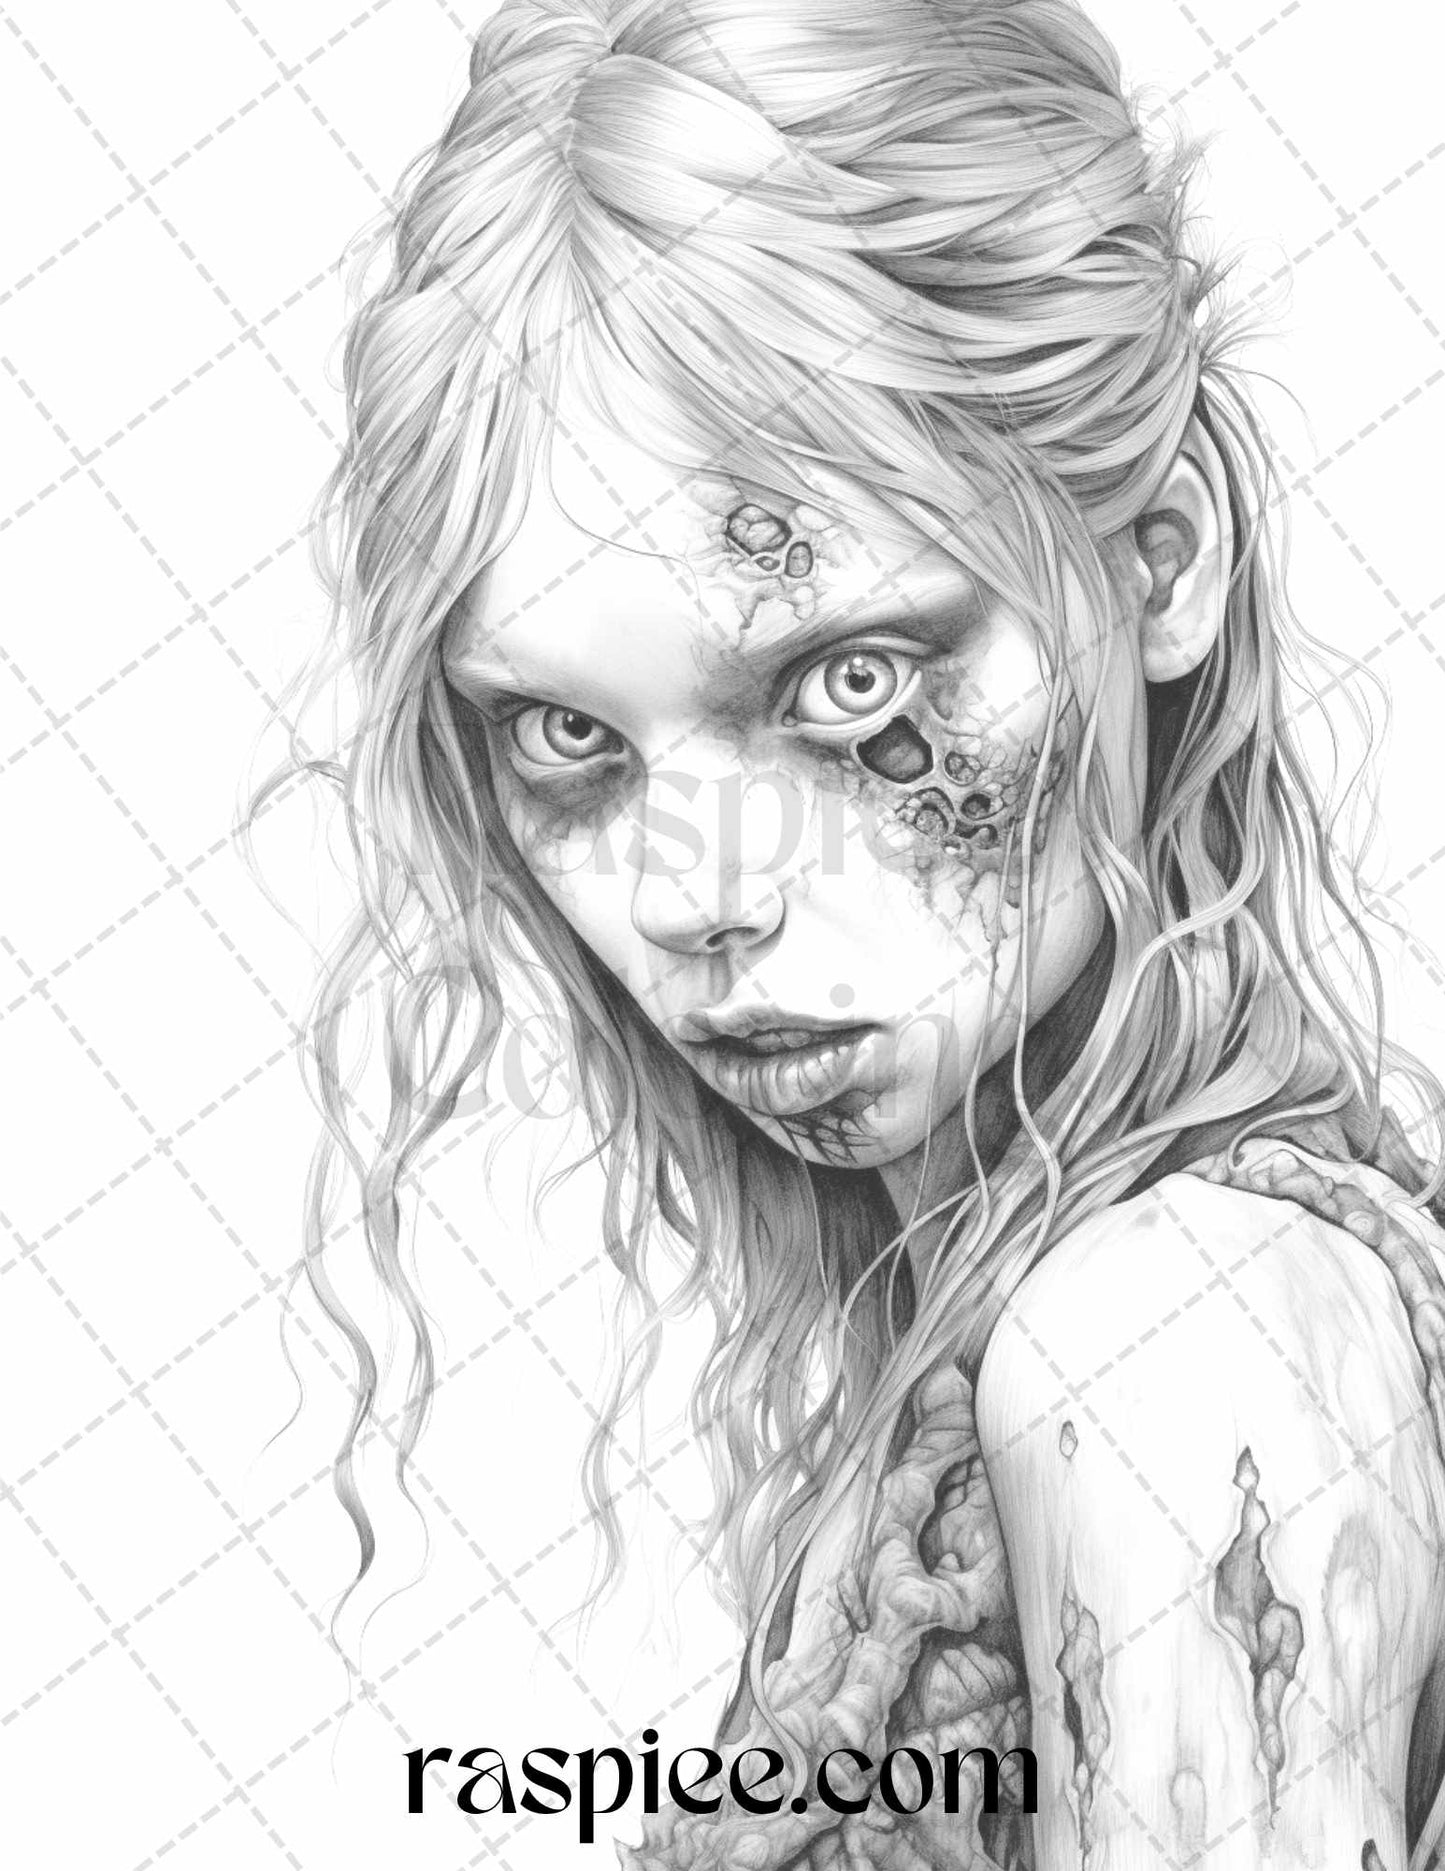 40 Scary Zombie Girls Grayscale Coloring Pages Printable for Adults, PDF File Instant Download - Raspiee Coloring